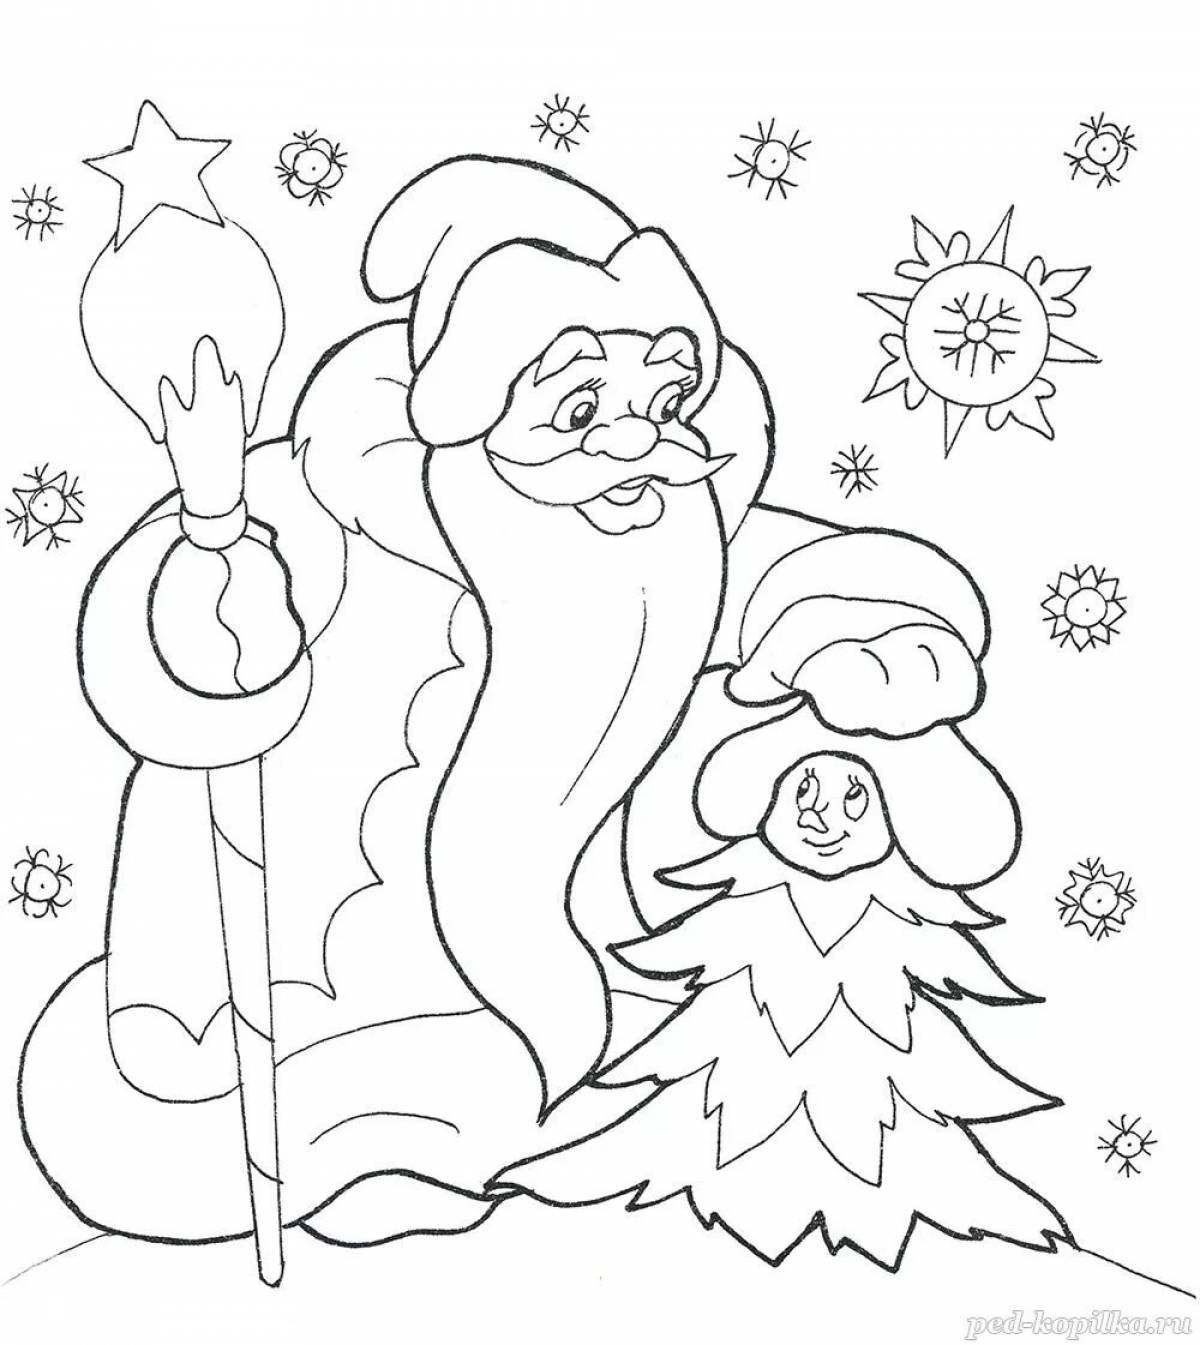 Santa Claus and Christmas tree for kids #4